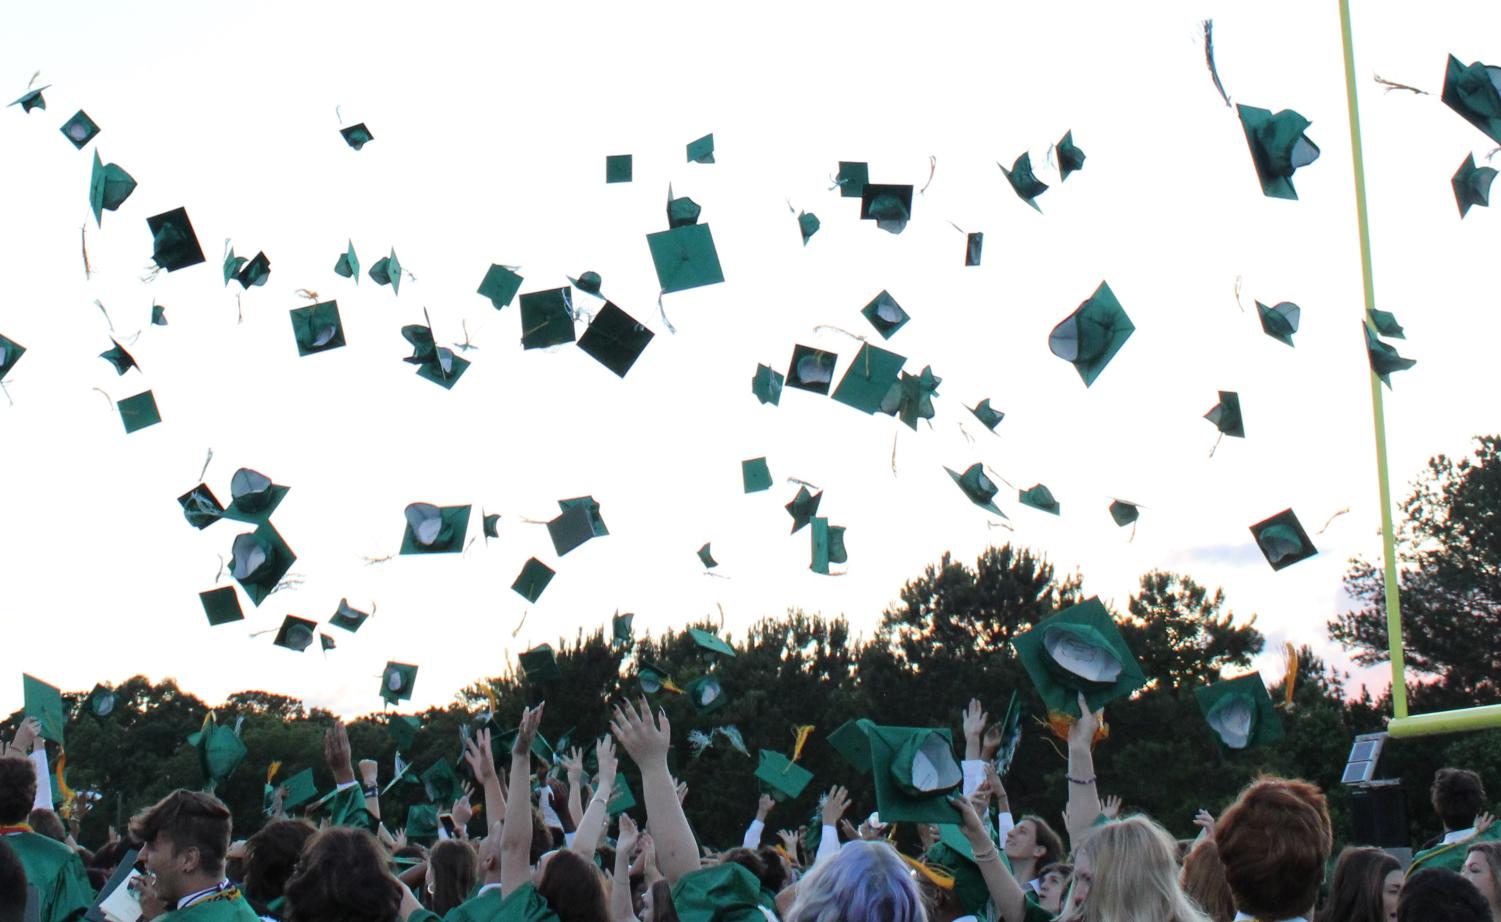 The+McIntosh+High+School+class+of+2022+at+graduation+in+May.+